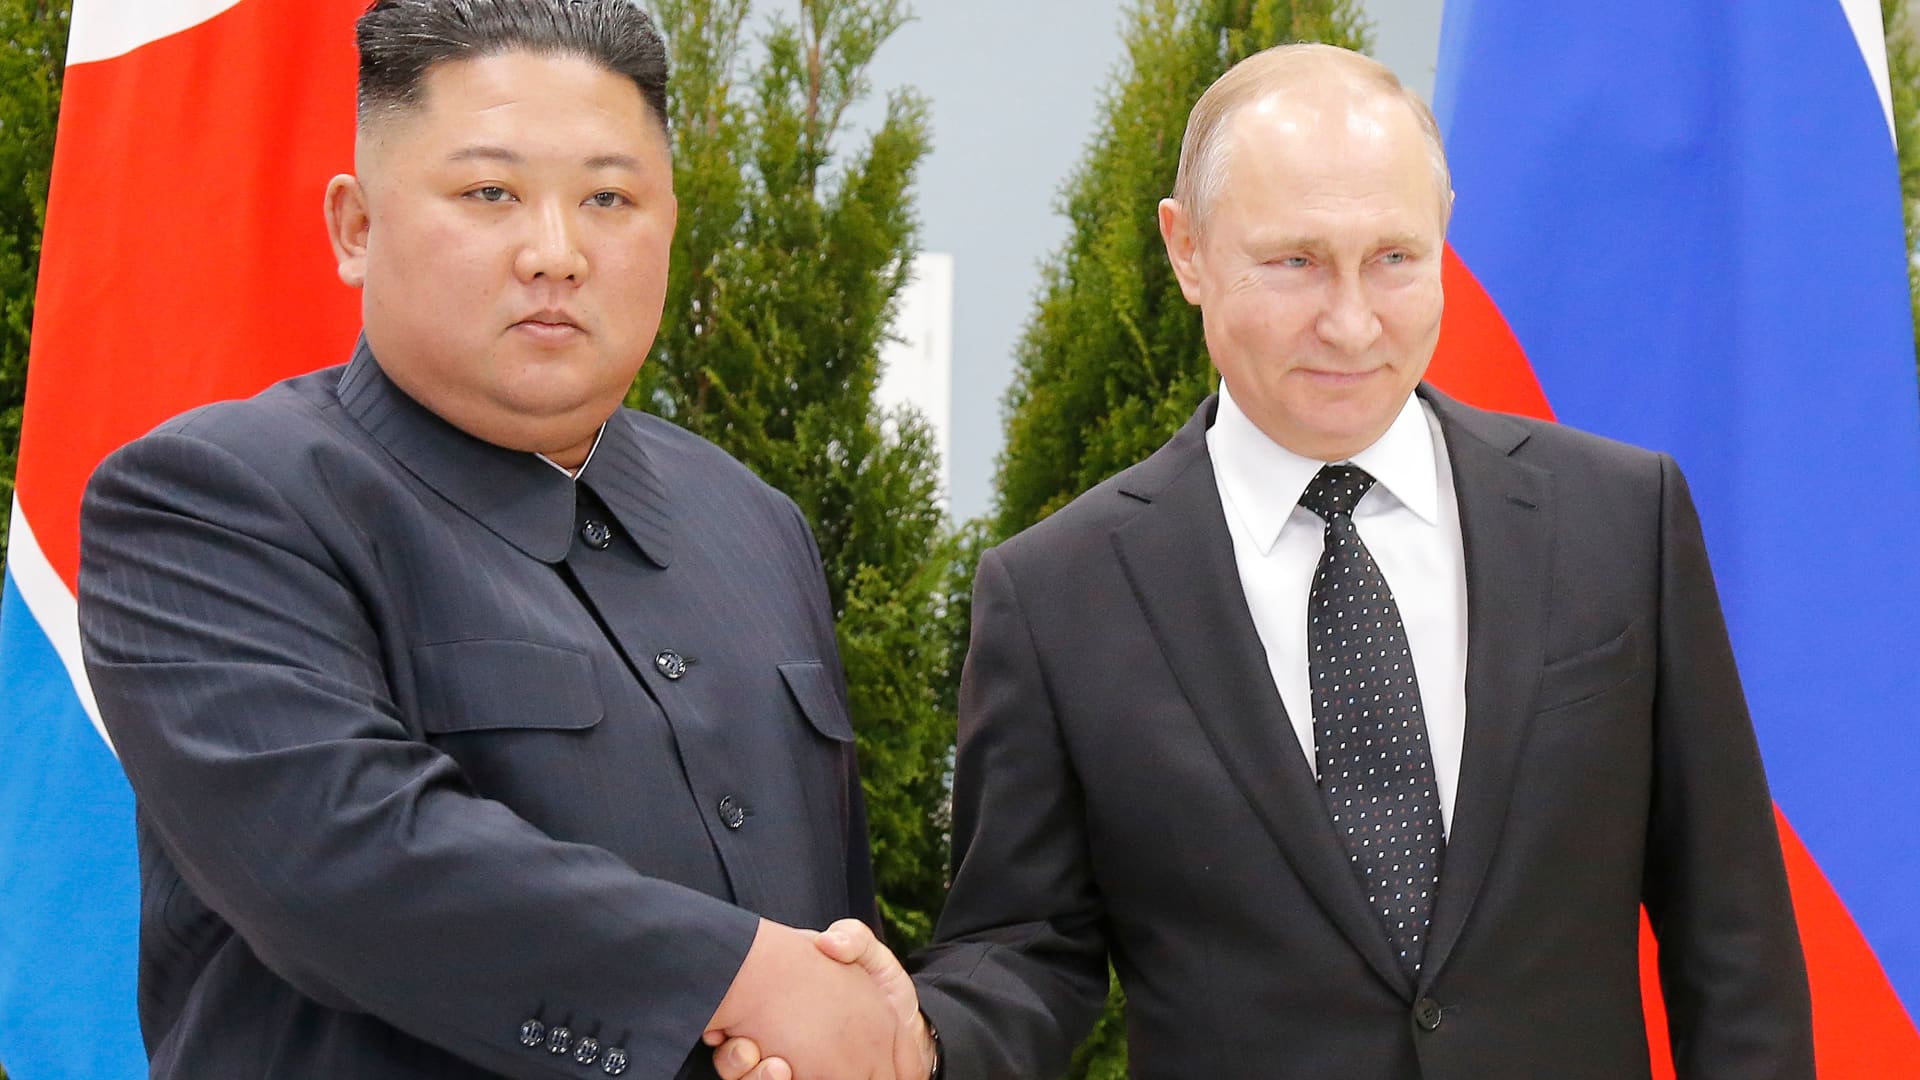 North Korea’s Kim Jong Un may meet with Putin in Russia this month, U.S. official says